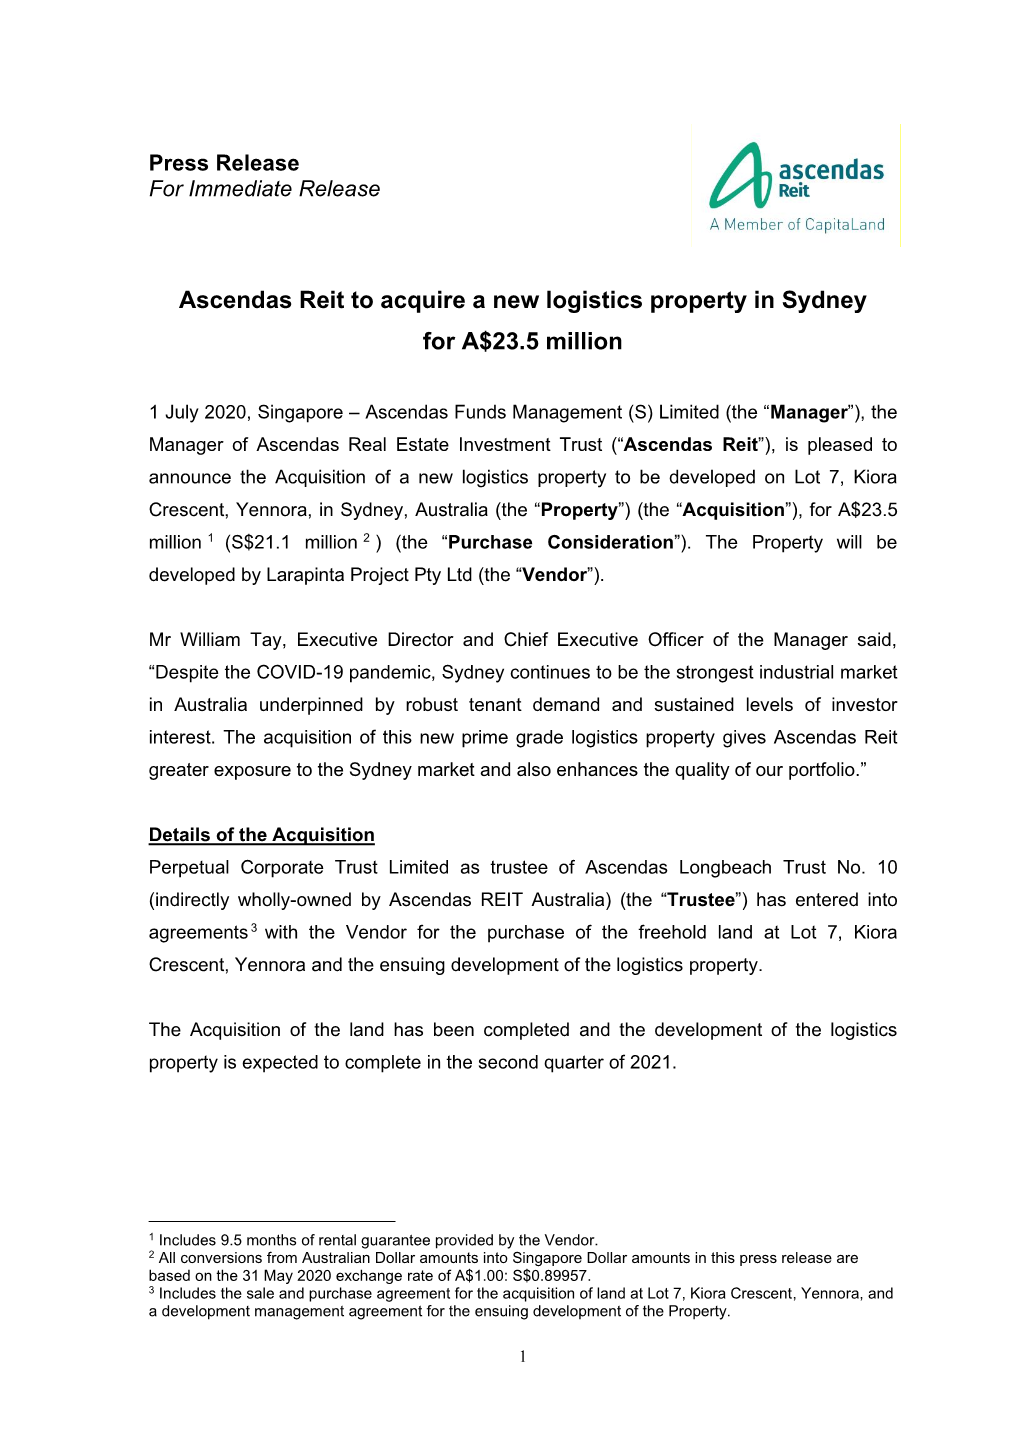 Ascendas Reit to Acquire a New Logistics Property in Sydney for A$23.5 Million